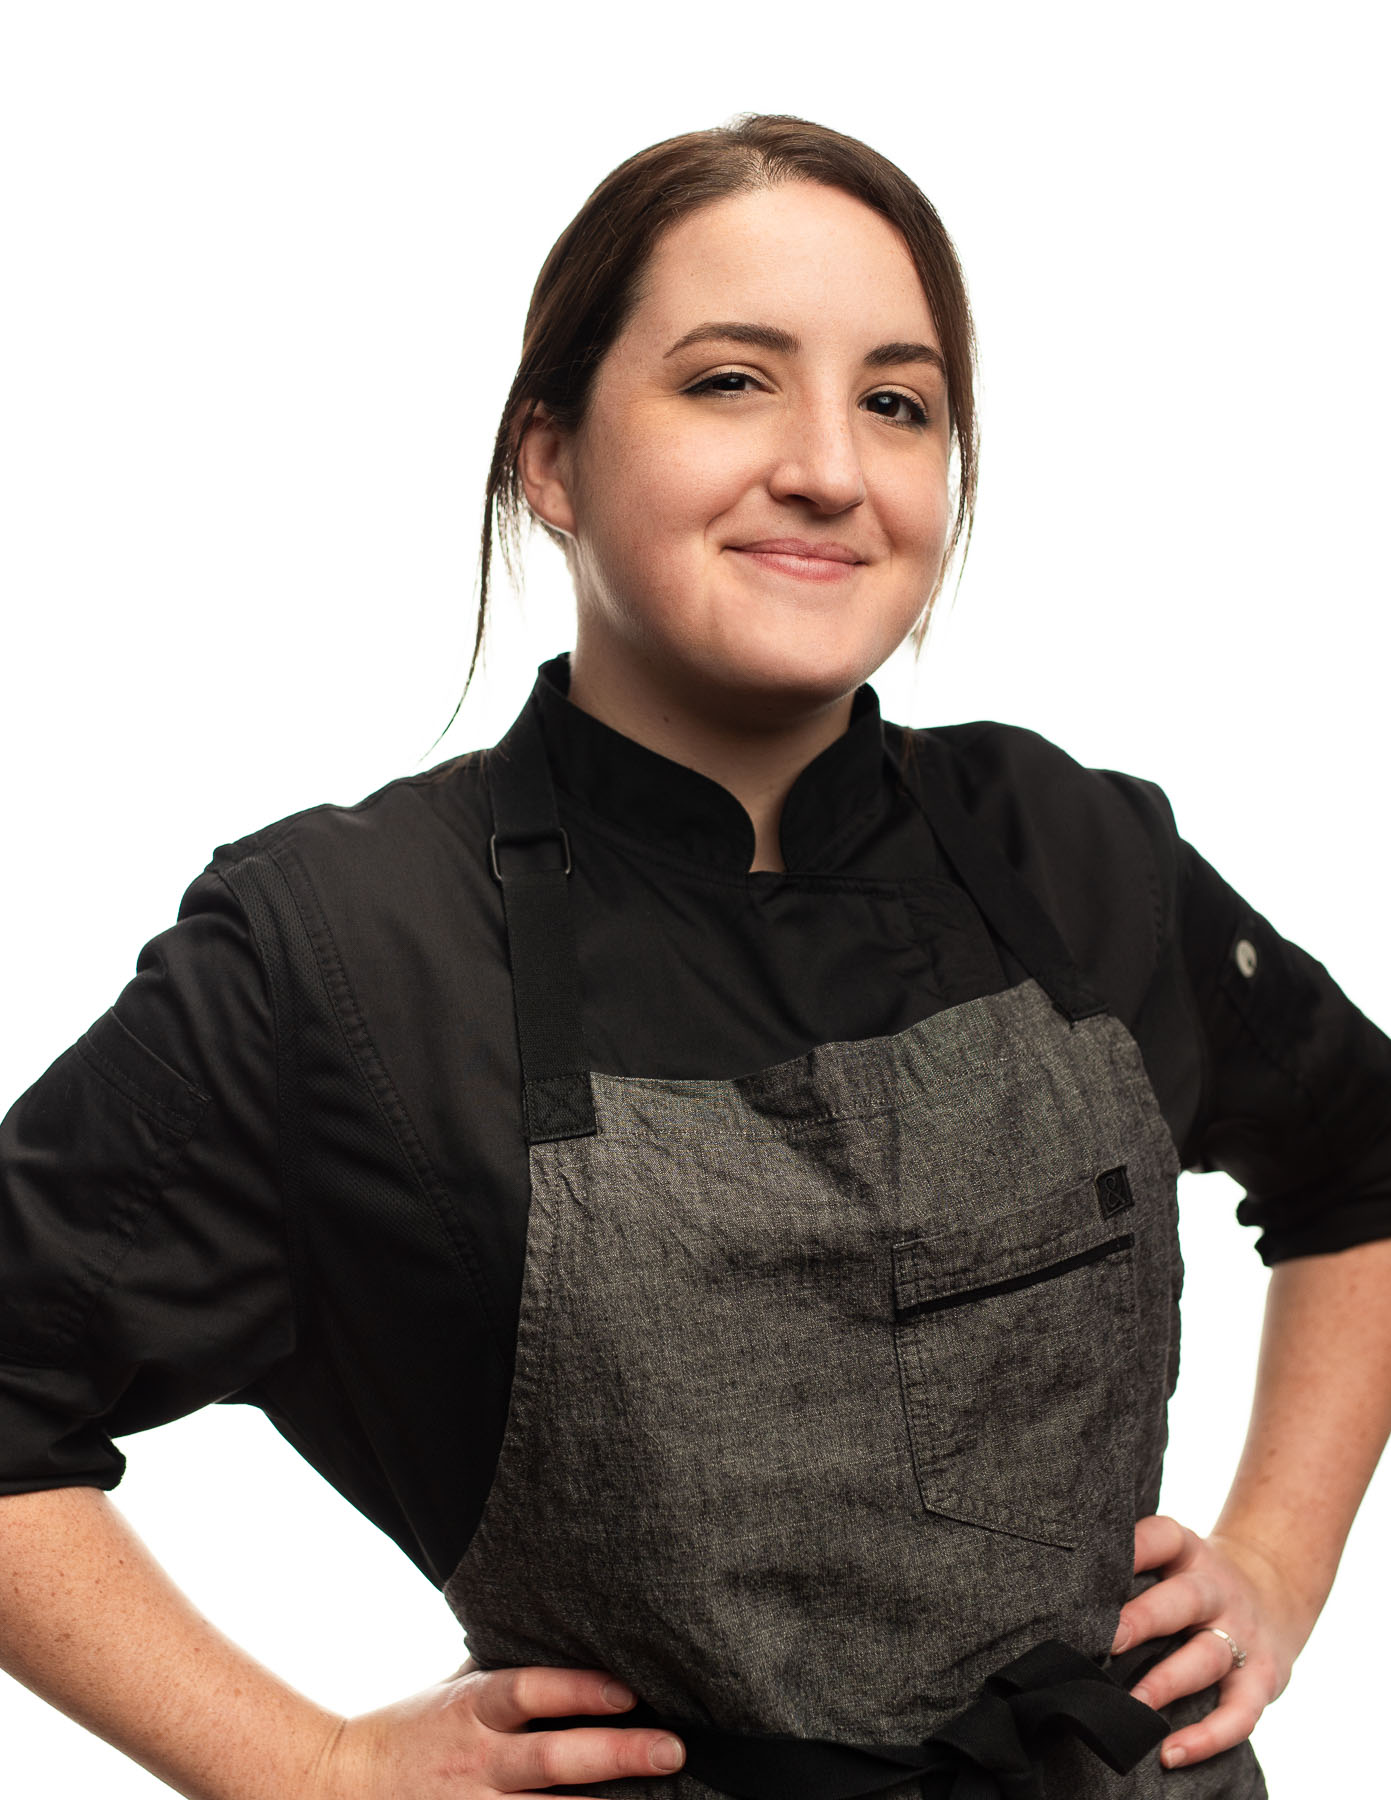 Headshot of woman with short brown hair wearing a gray chef outfit smiling and posing for the camera